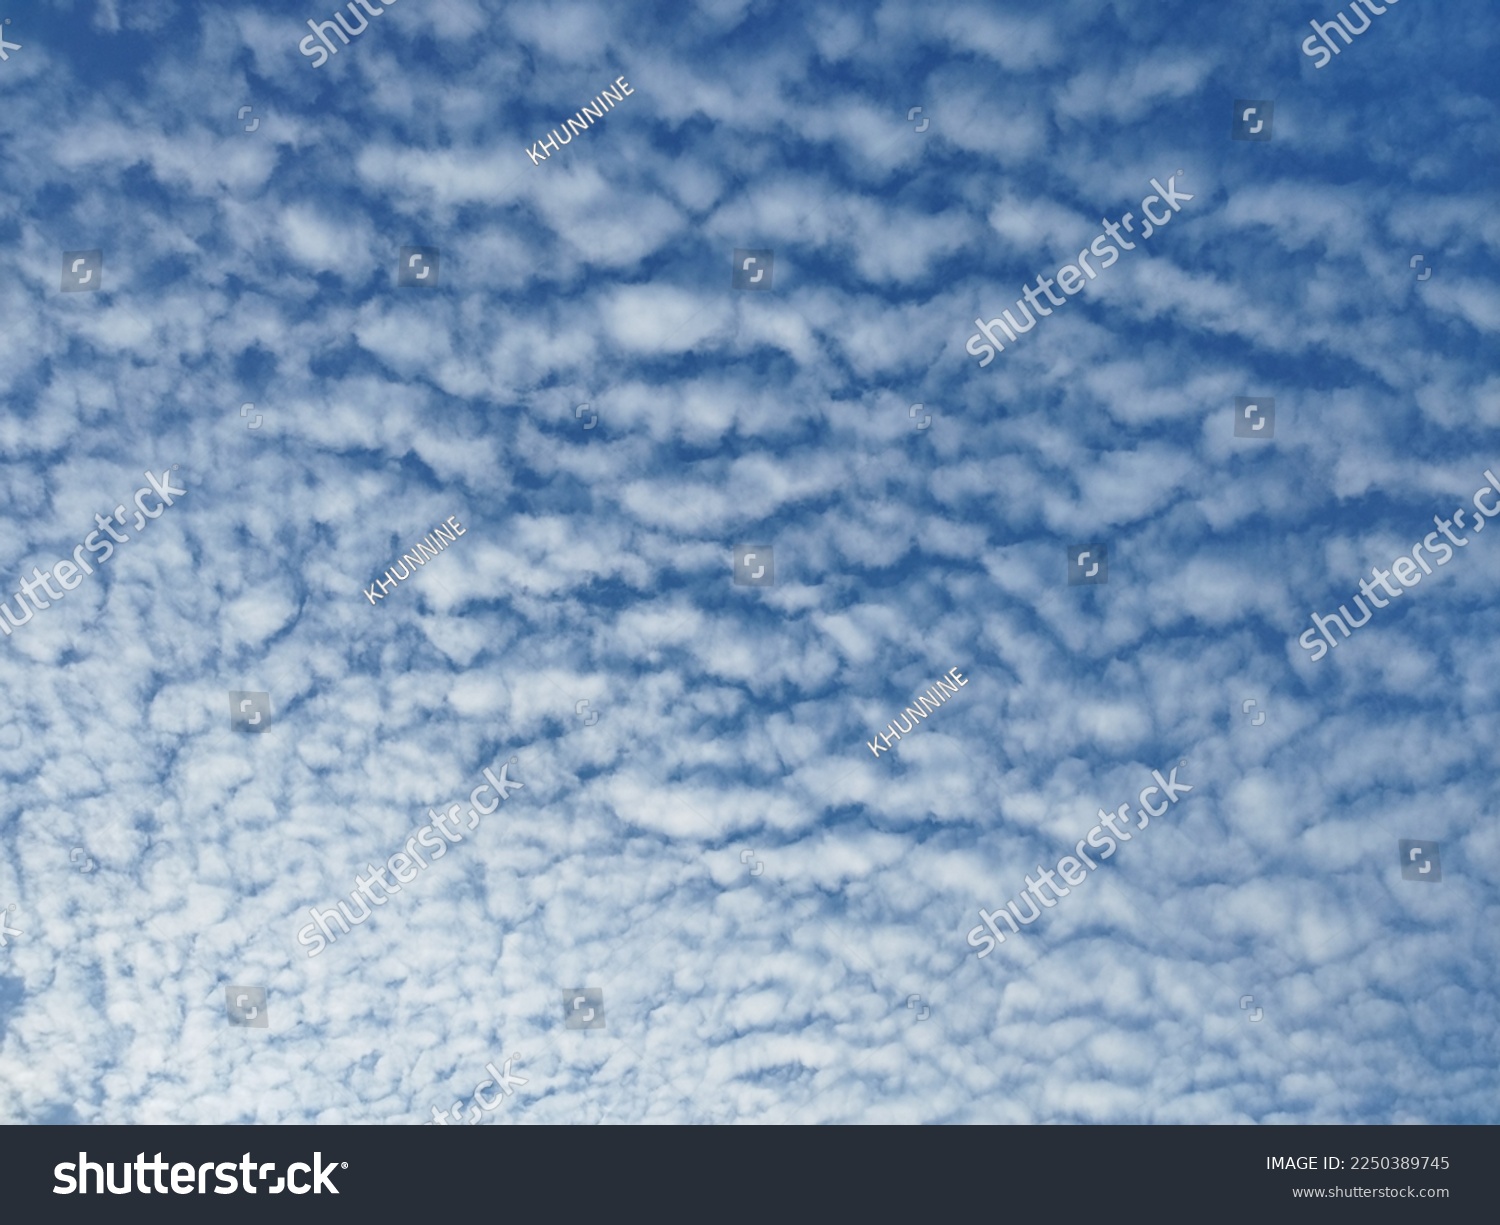 A mackerel sky is a common term for clouds made up of rows of Altocumulus rippling pattern similar in appearance to fish scales. Altocumulus floccus white fluffy clouds covering the blue sky.  #2250389745